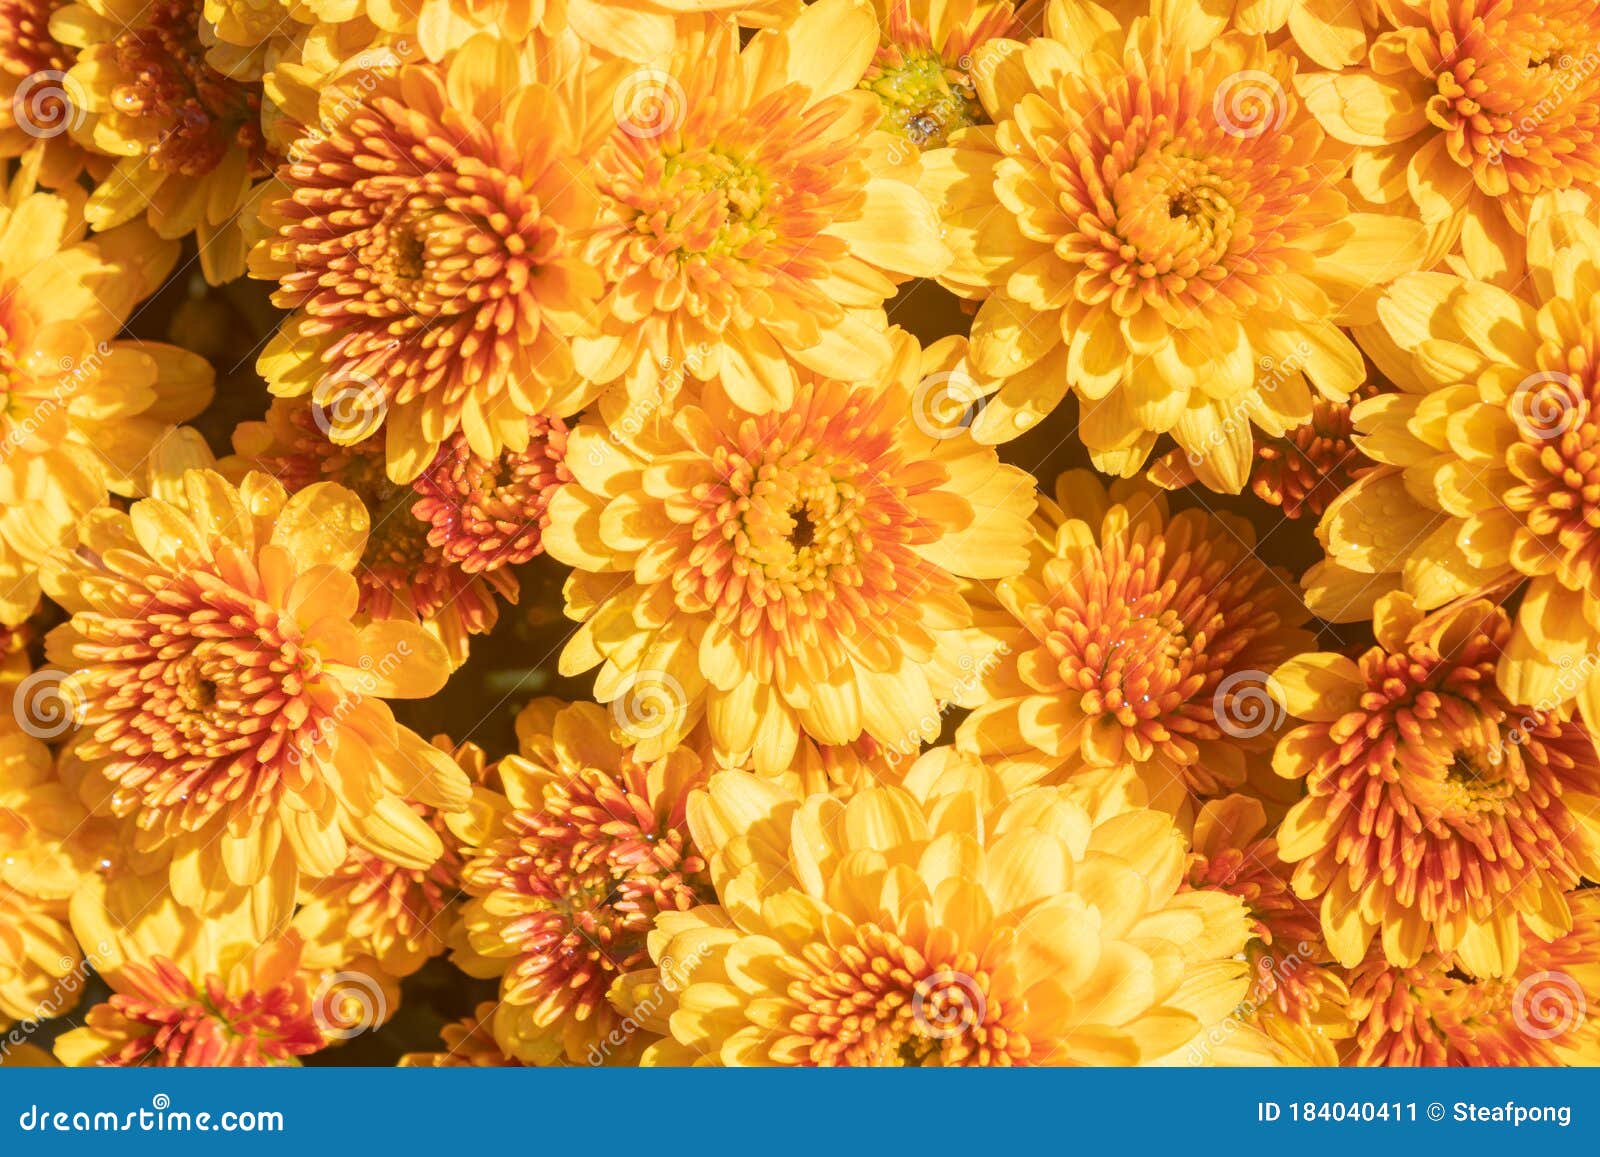 yellow orange chrysanthemum or mums flowers with natural light background